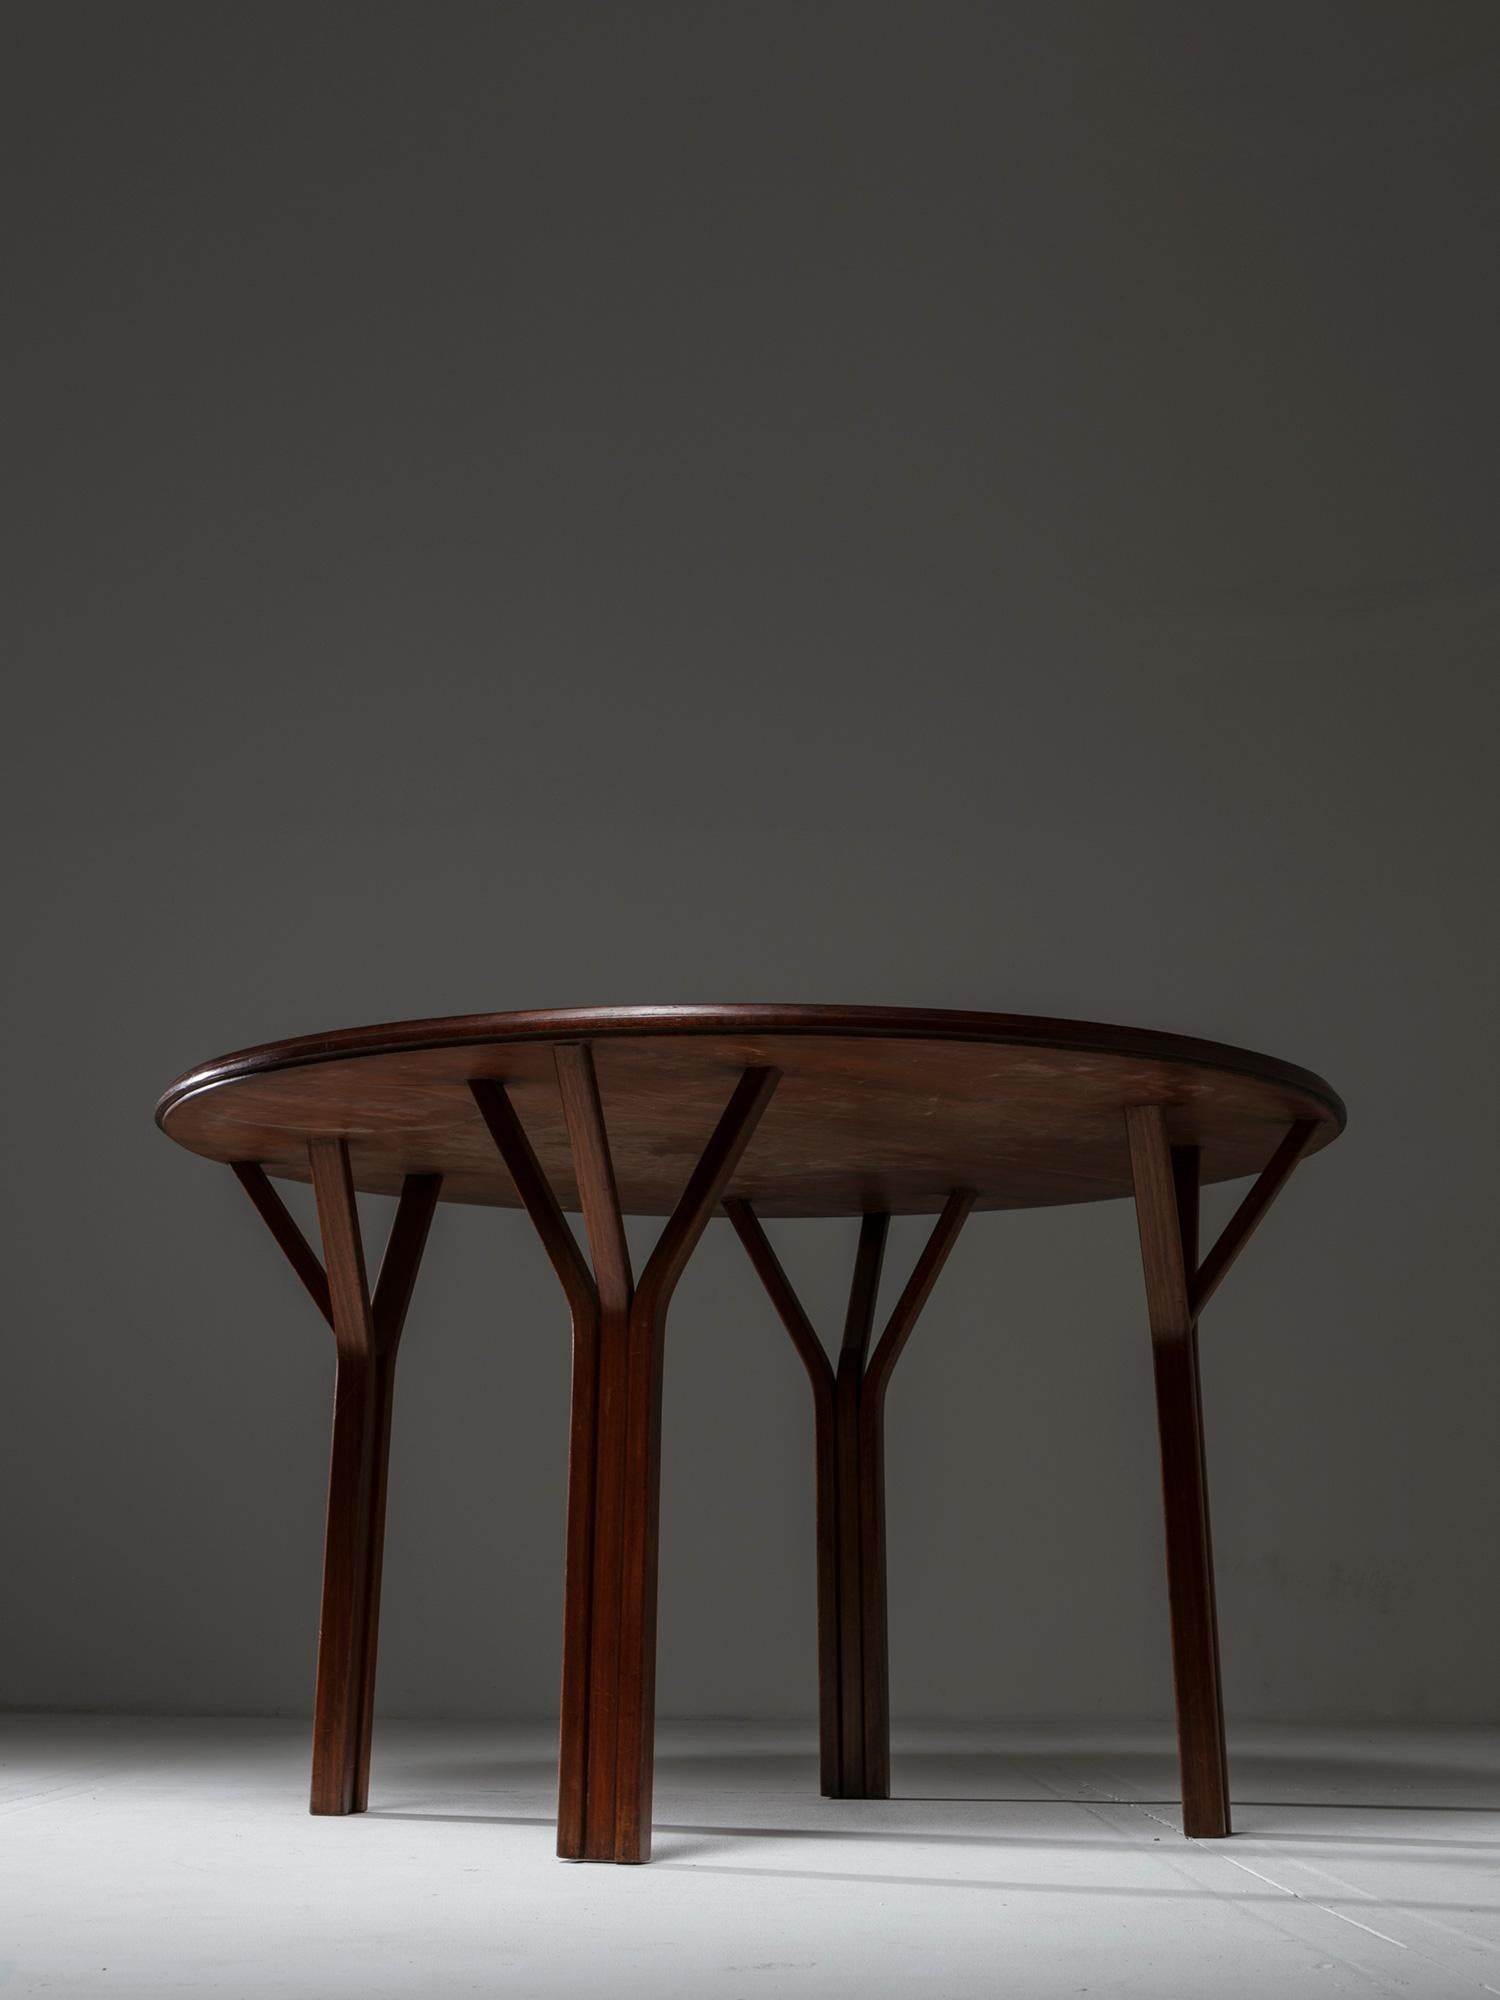 Organic Modern Round  Wood Table by Gregotti, Meneghetti, Stoppino for SIM, Italy, 1950s For Sale